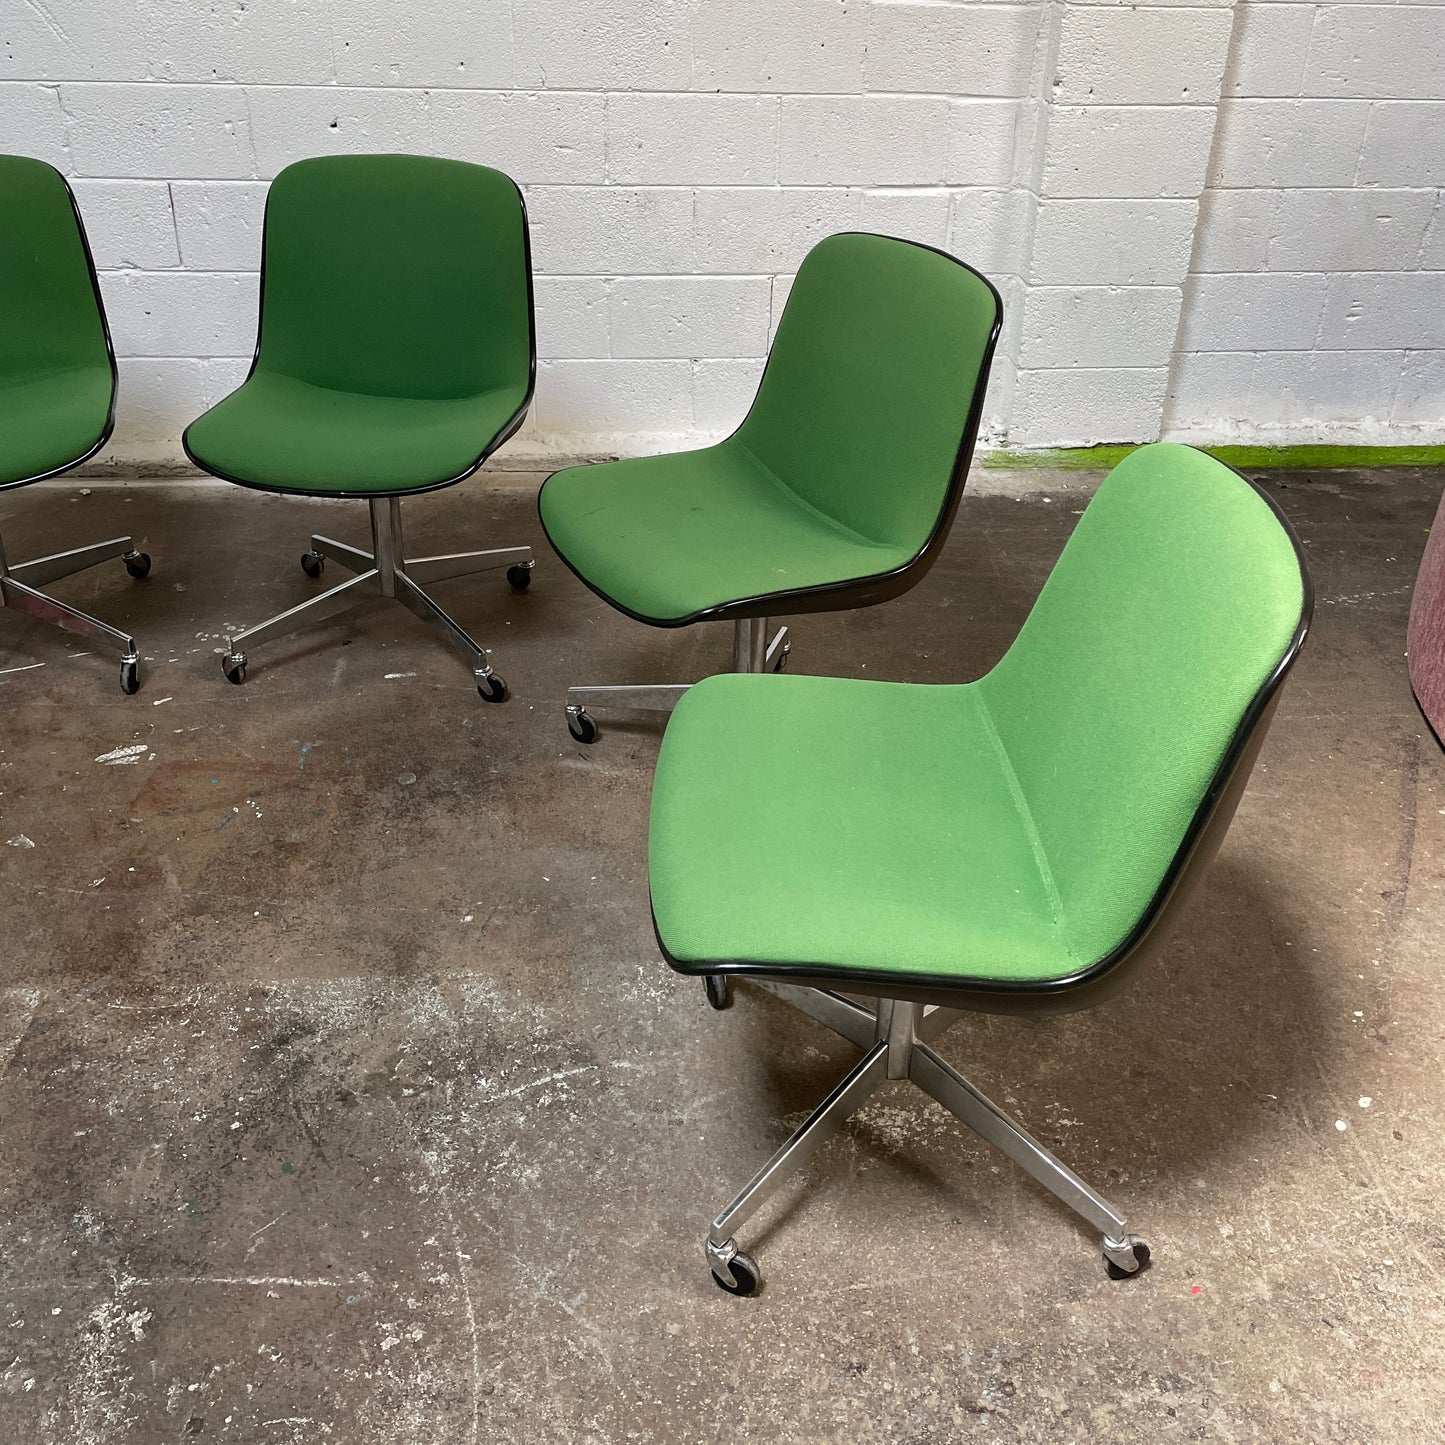 Steelcase Chairs on Casters